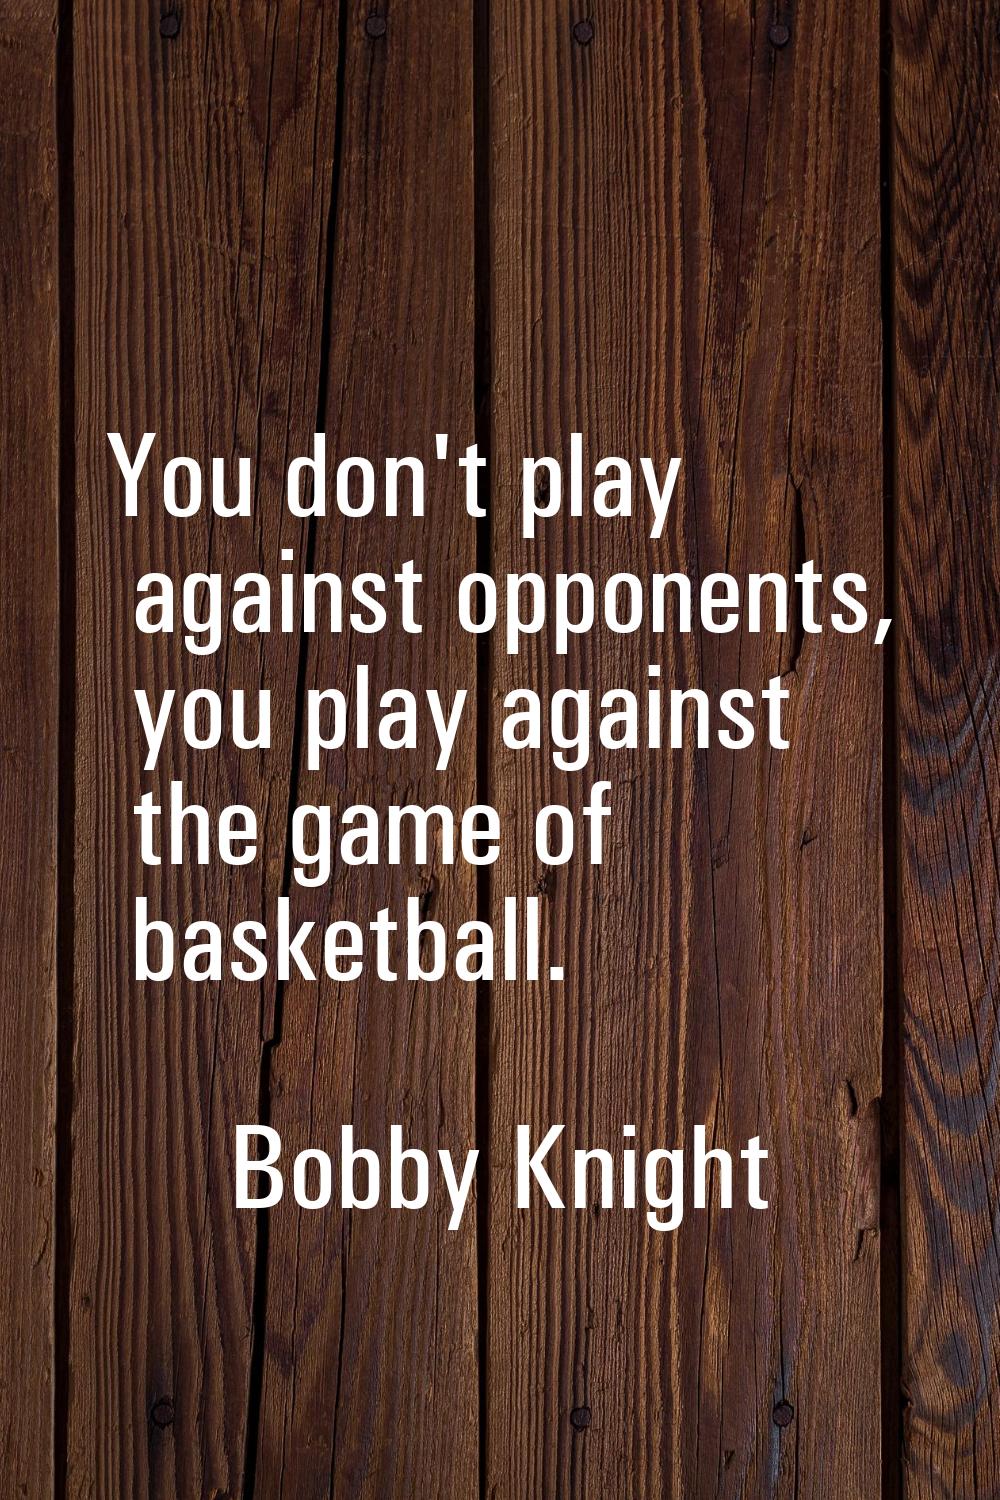 You don't play against opponents, you play against the game of basketball.